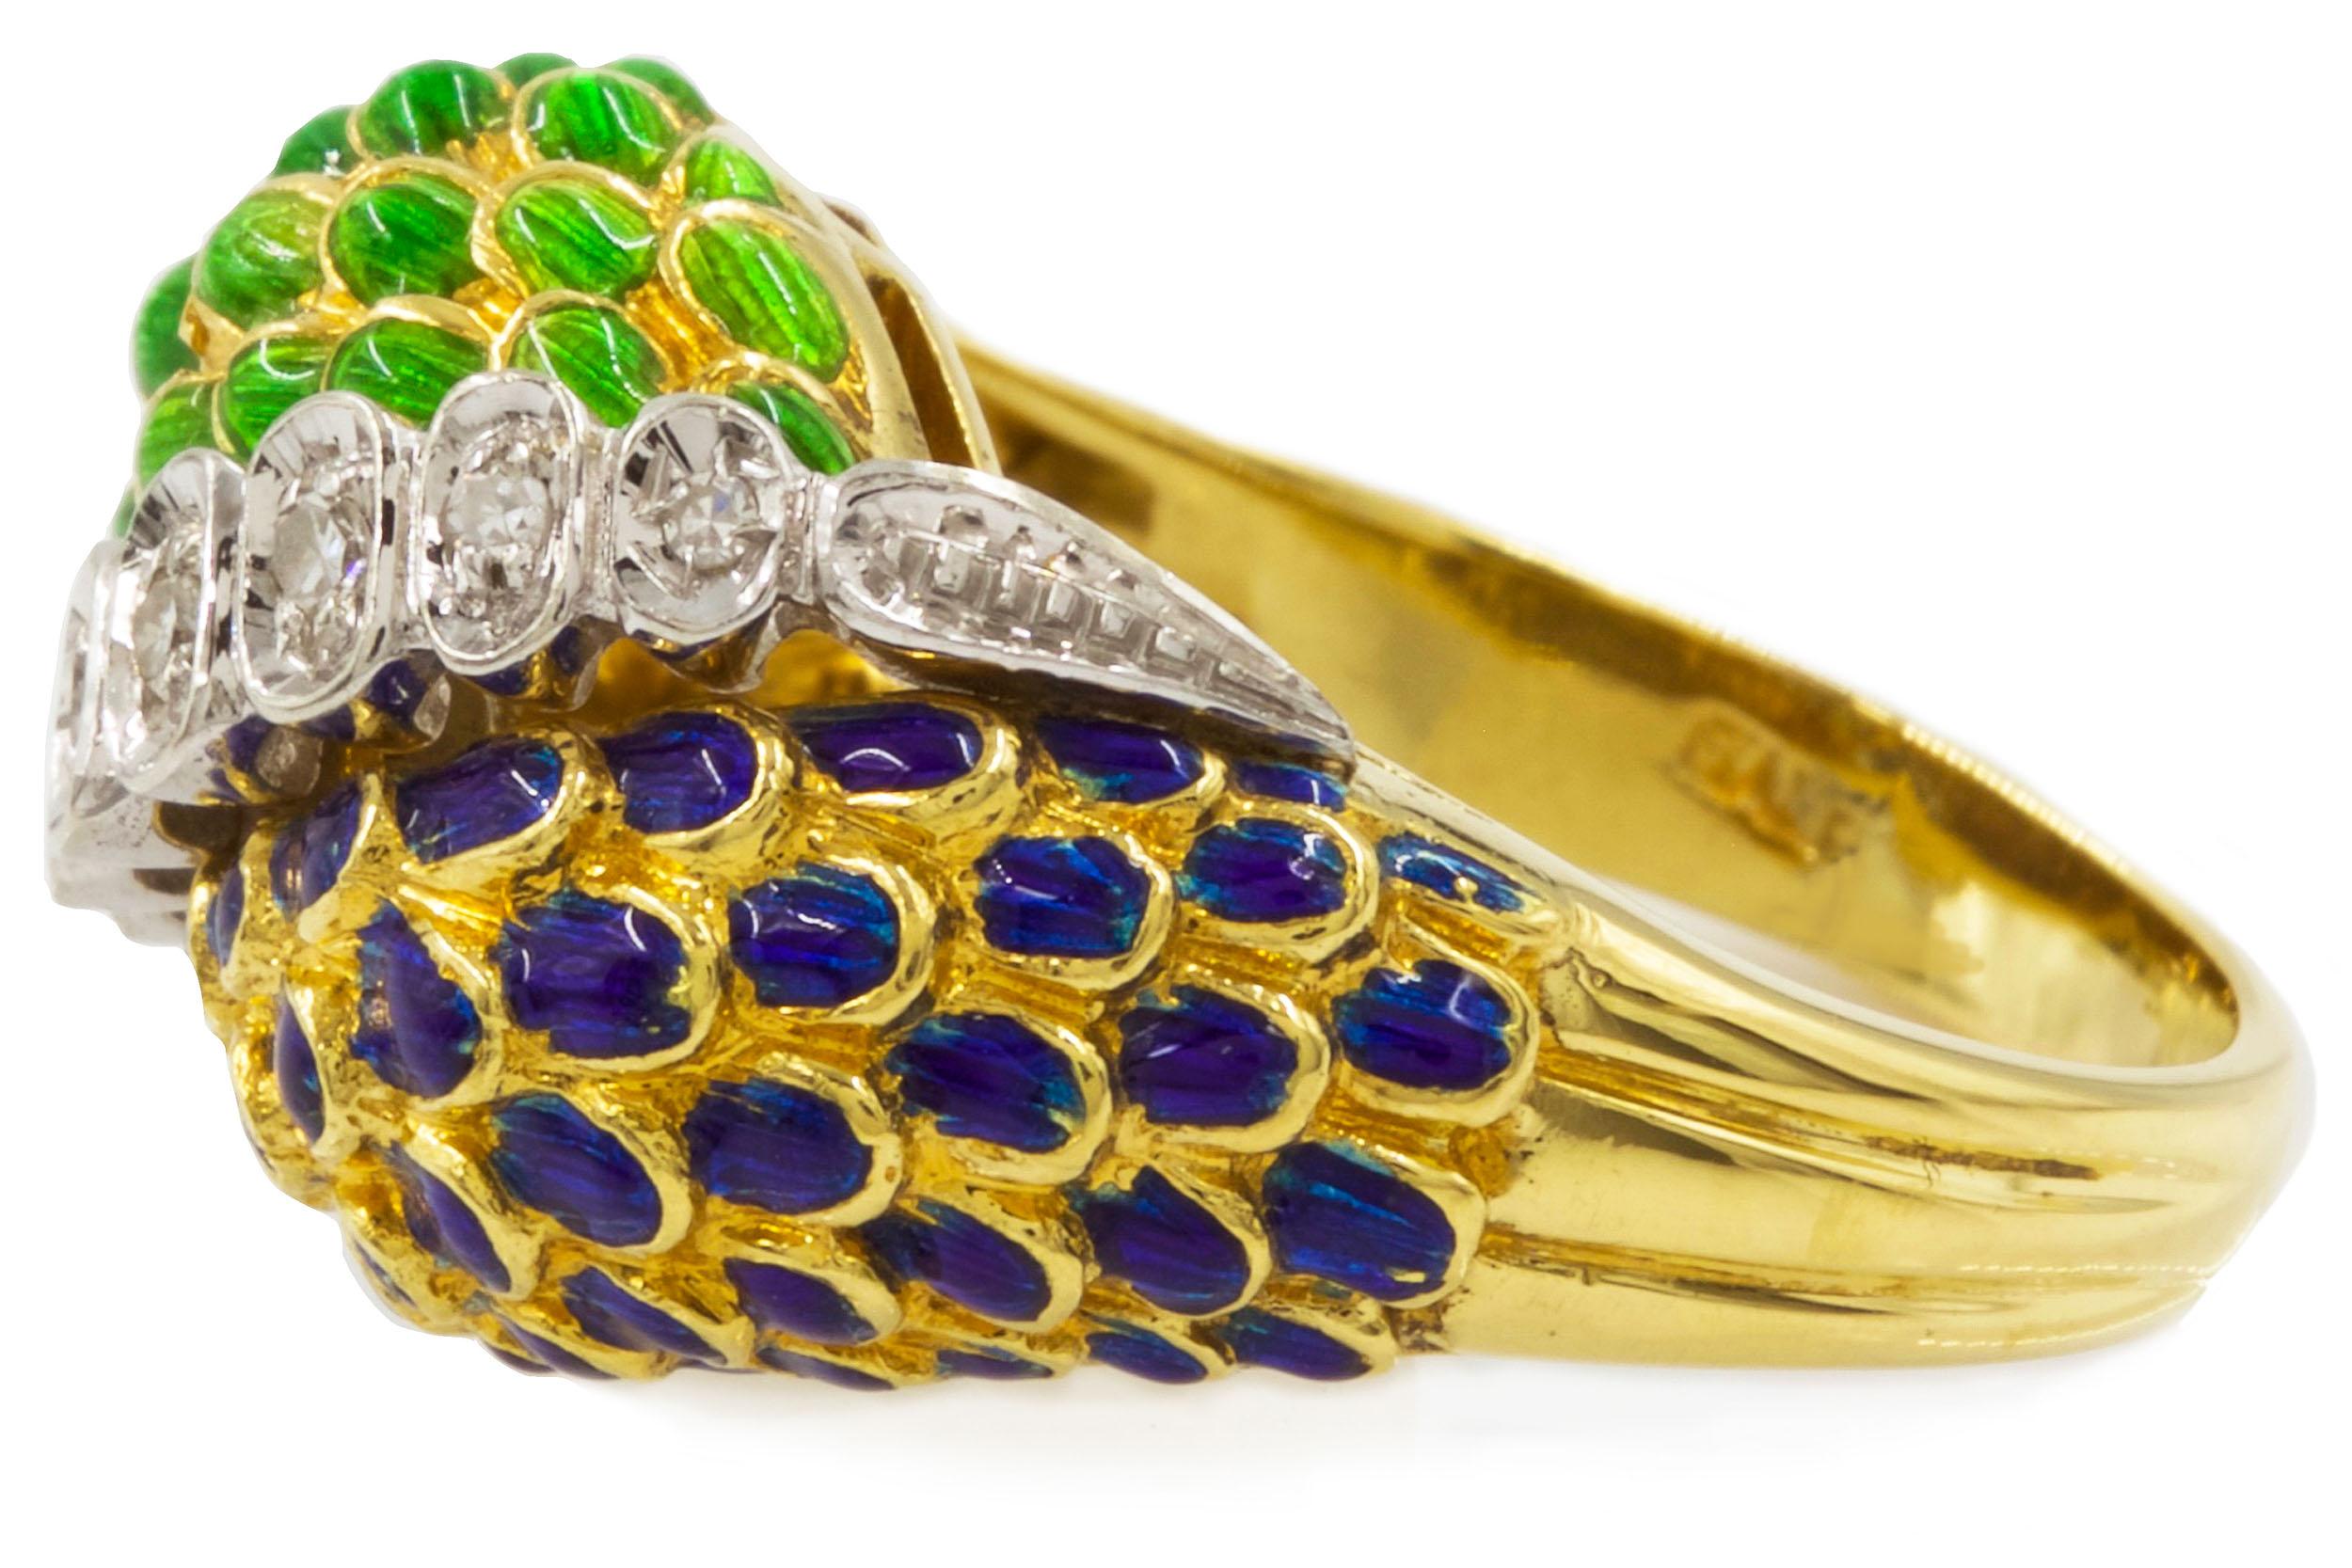 Italian Vintage 18k Gold and Diamond Ring with Blue & Green Enamel For Sale